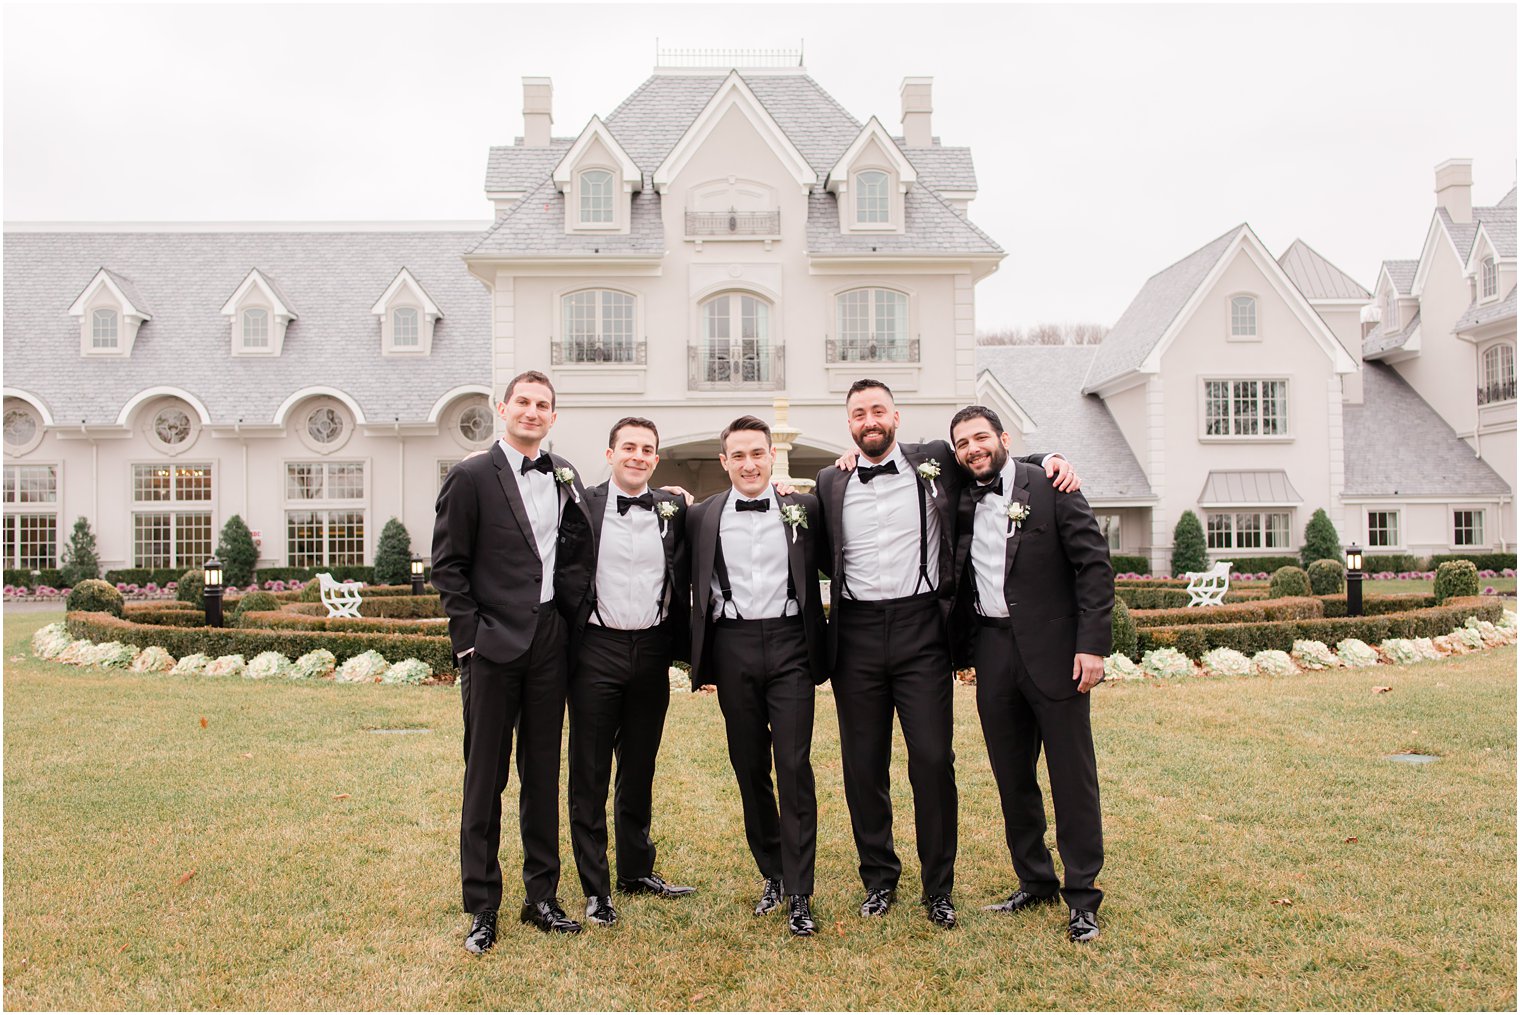 Groom and groomsmen at Park Chateau Estate in East Brunswick, NJ